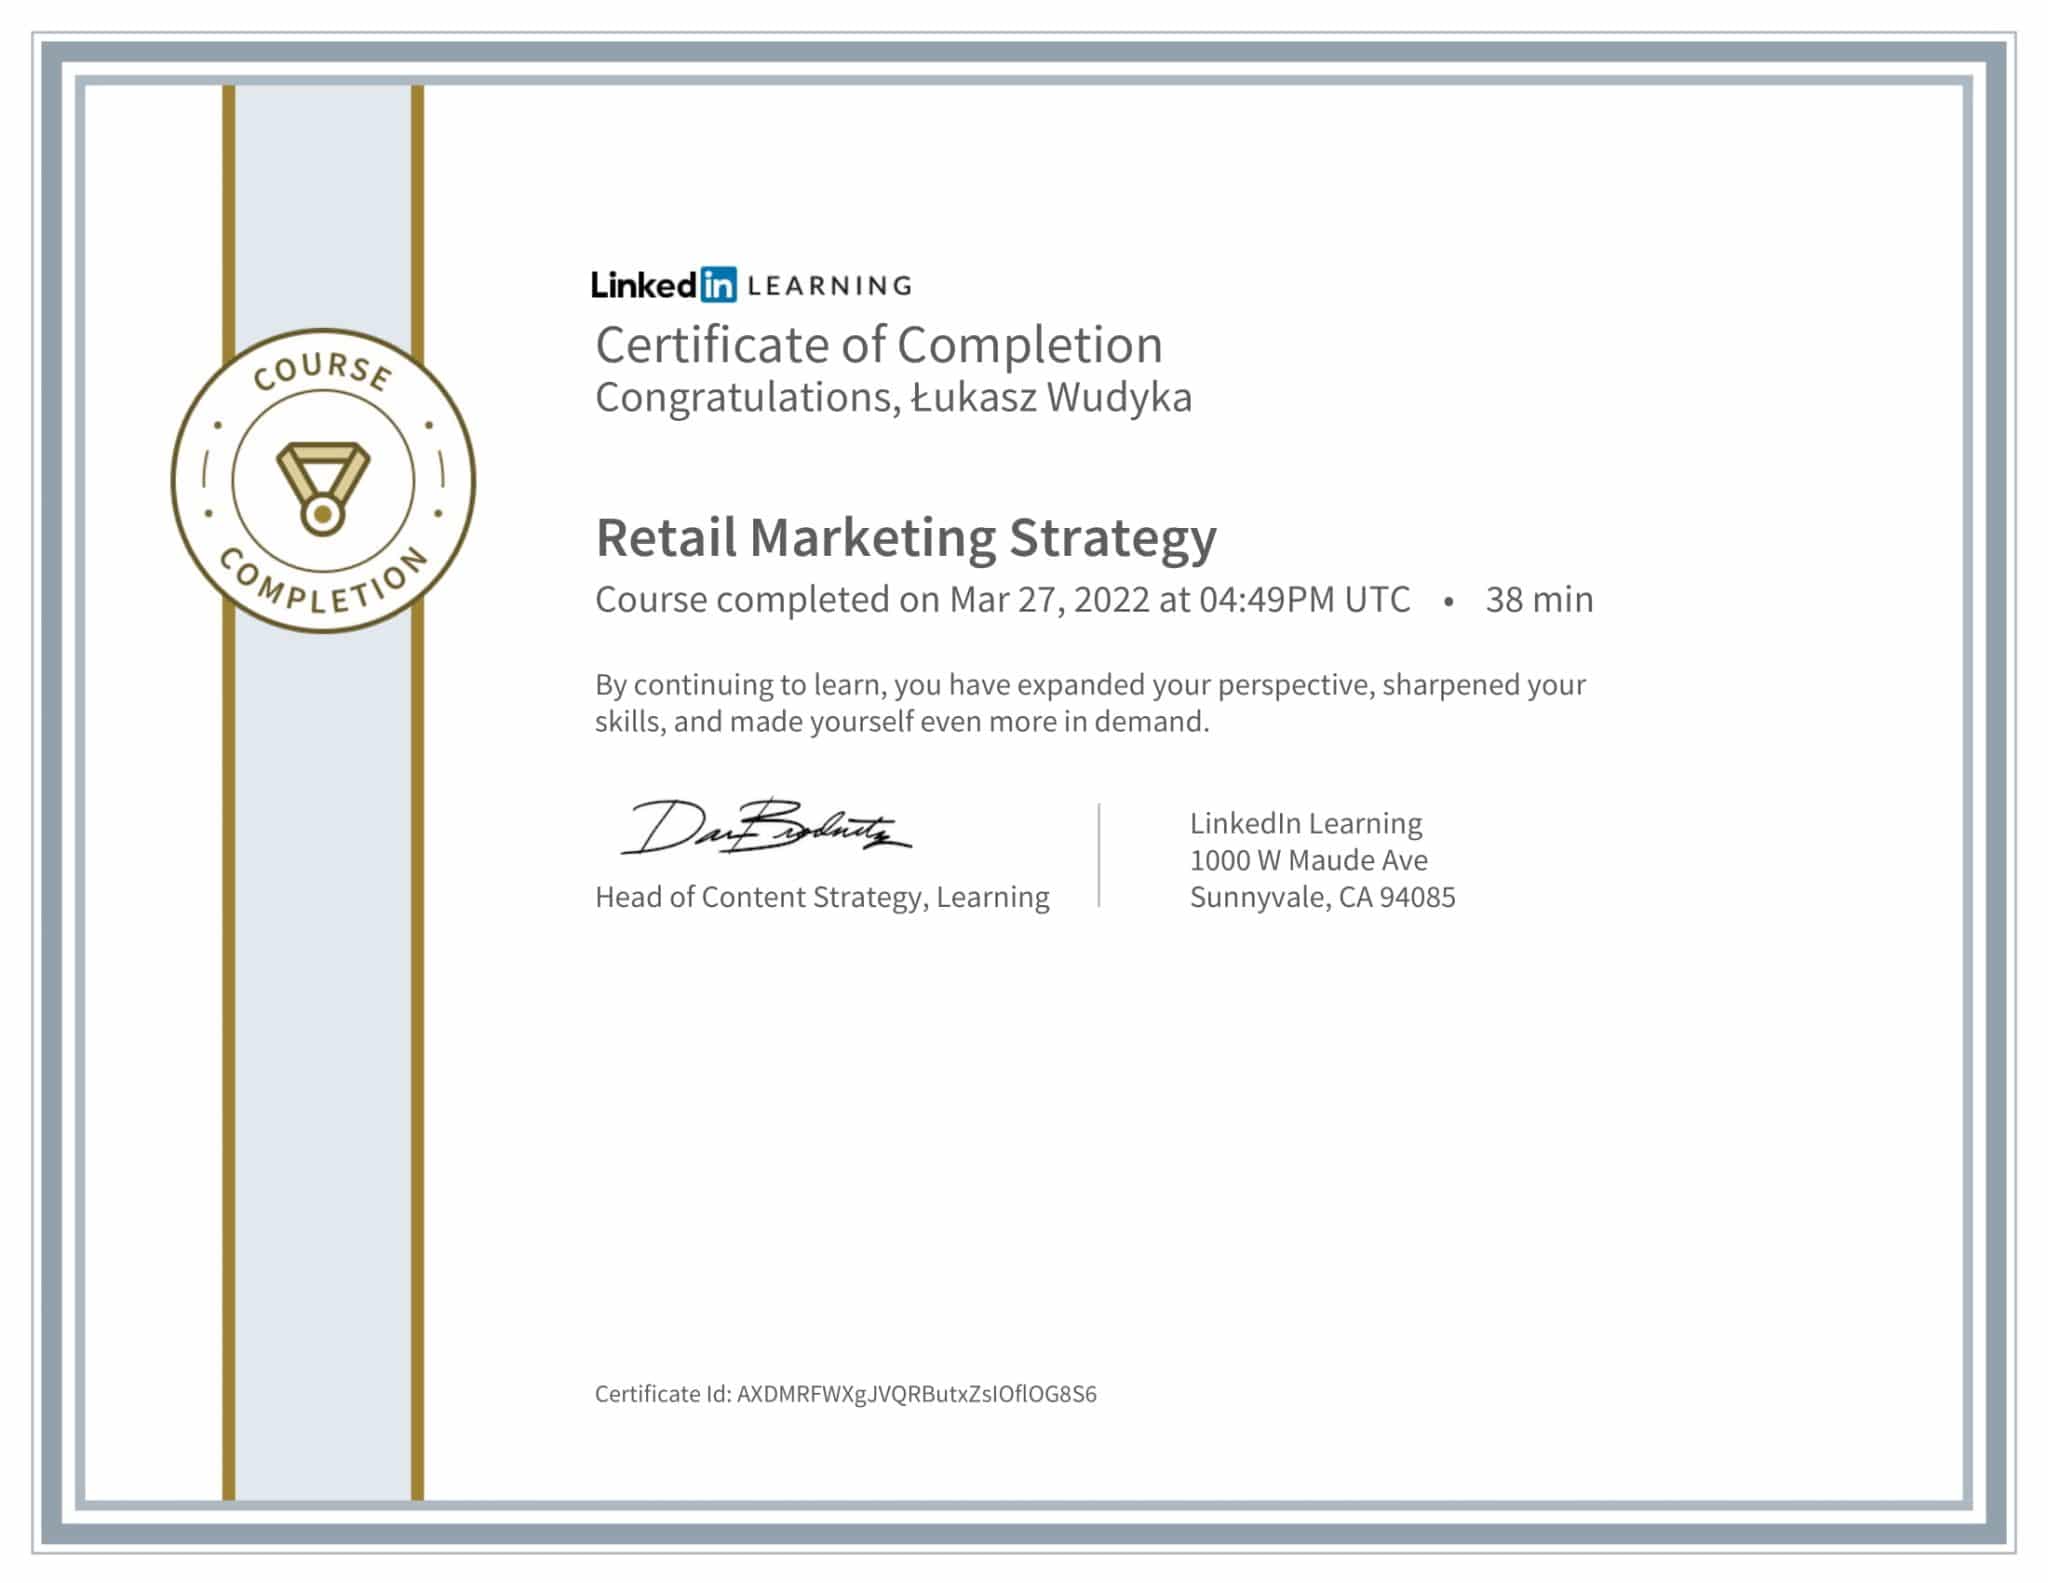 CertificateOfCompletion_Retail Marketing Strategy-1